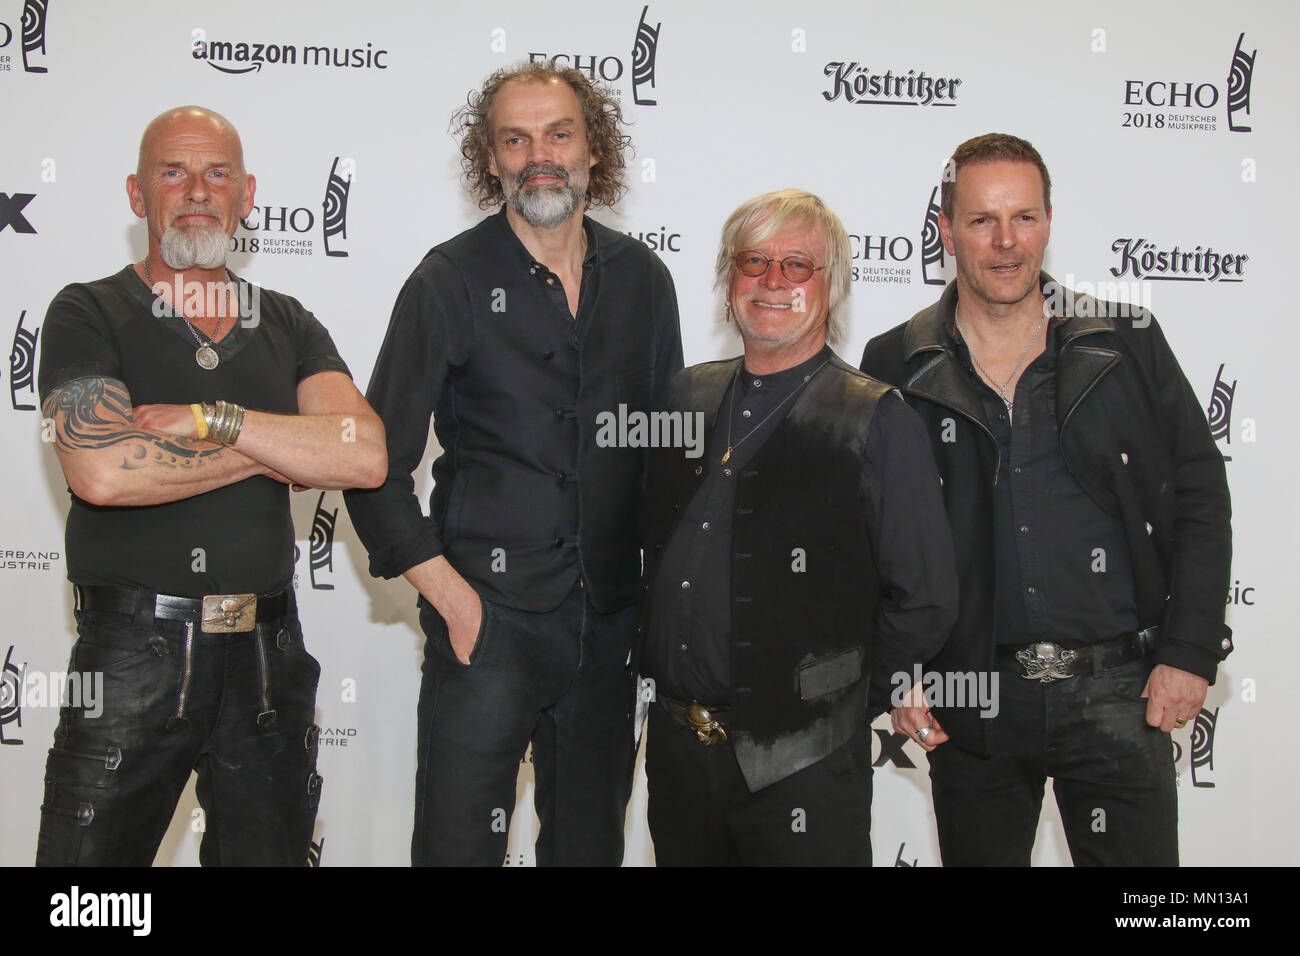 ECHO music awards 2018 at Messe (fair) - Arrivals Featuring: Santiano  Where: Berlin, Germany When: 13 Apr 2018 Credit: Becher/WENN.com Stock  Photo - Alamy